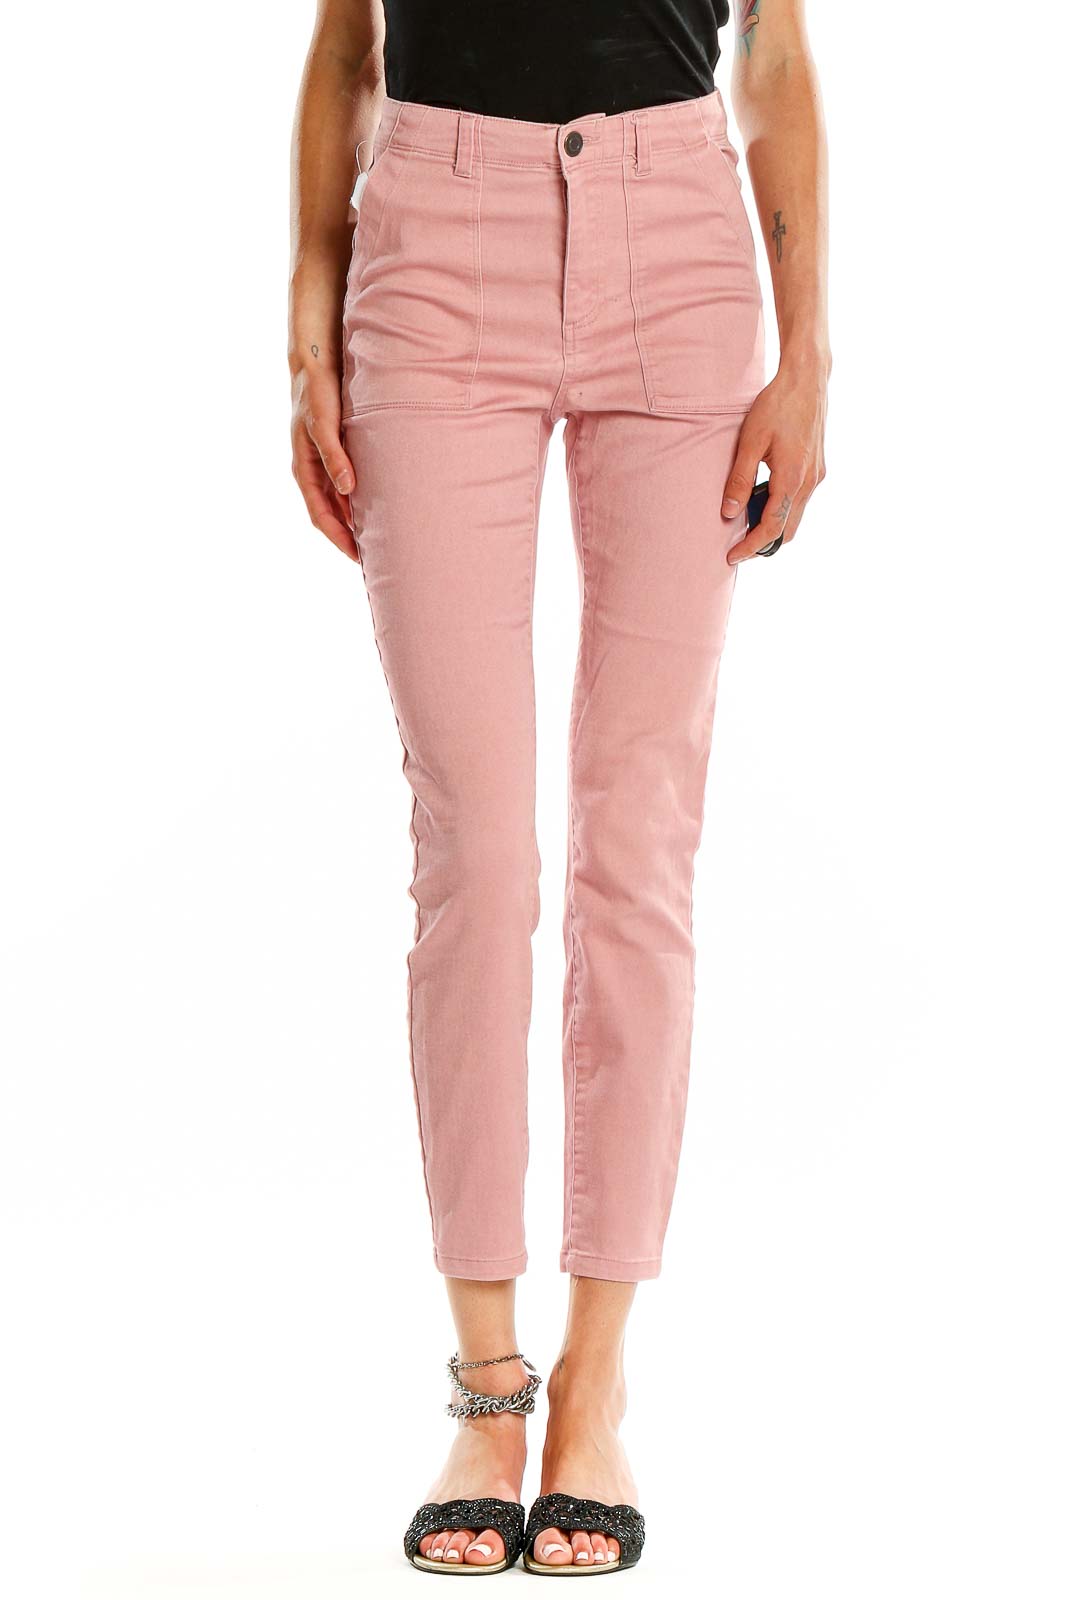 Pink High Waisted Skinny Jeans Front